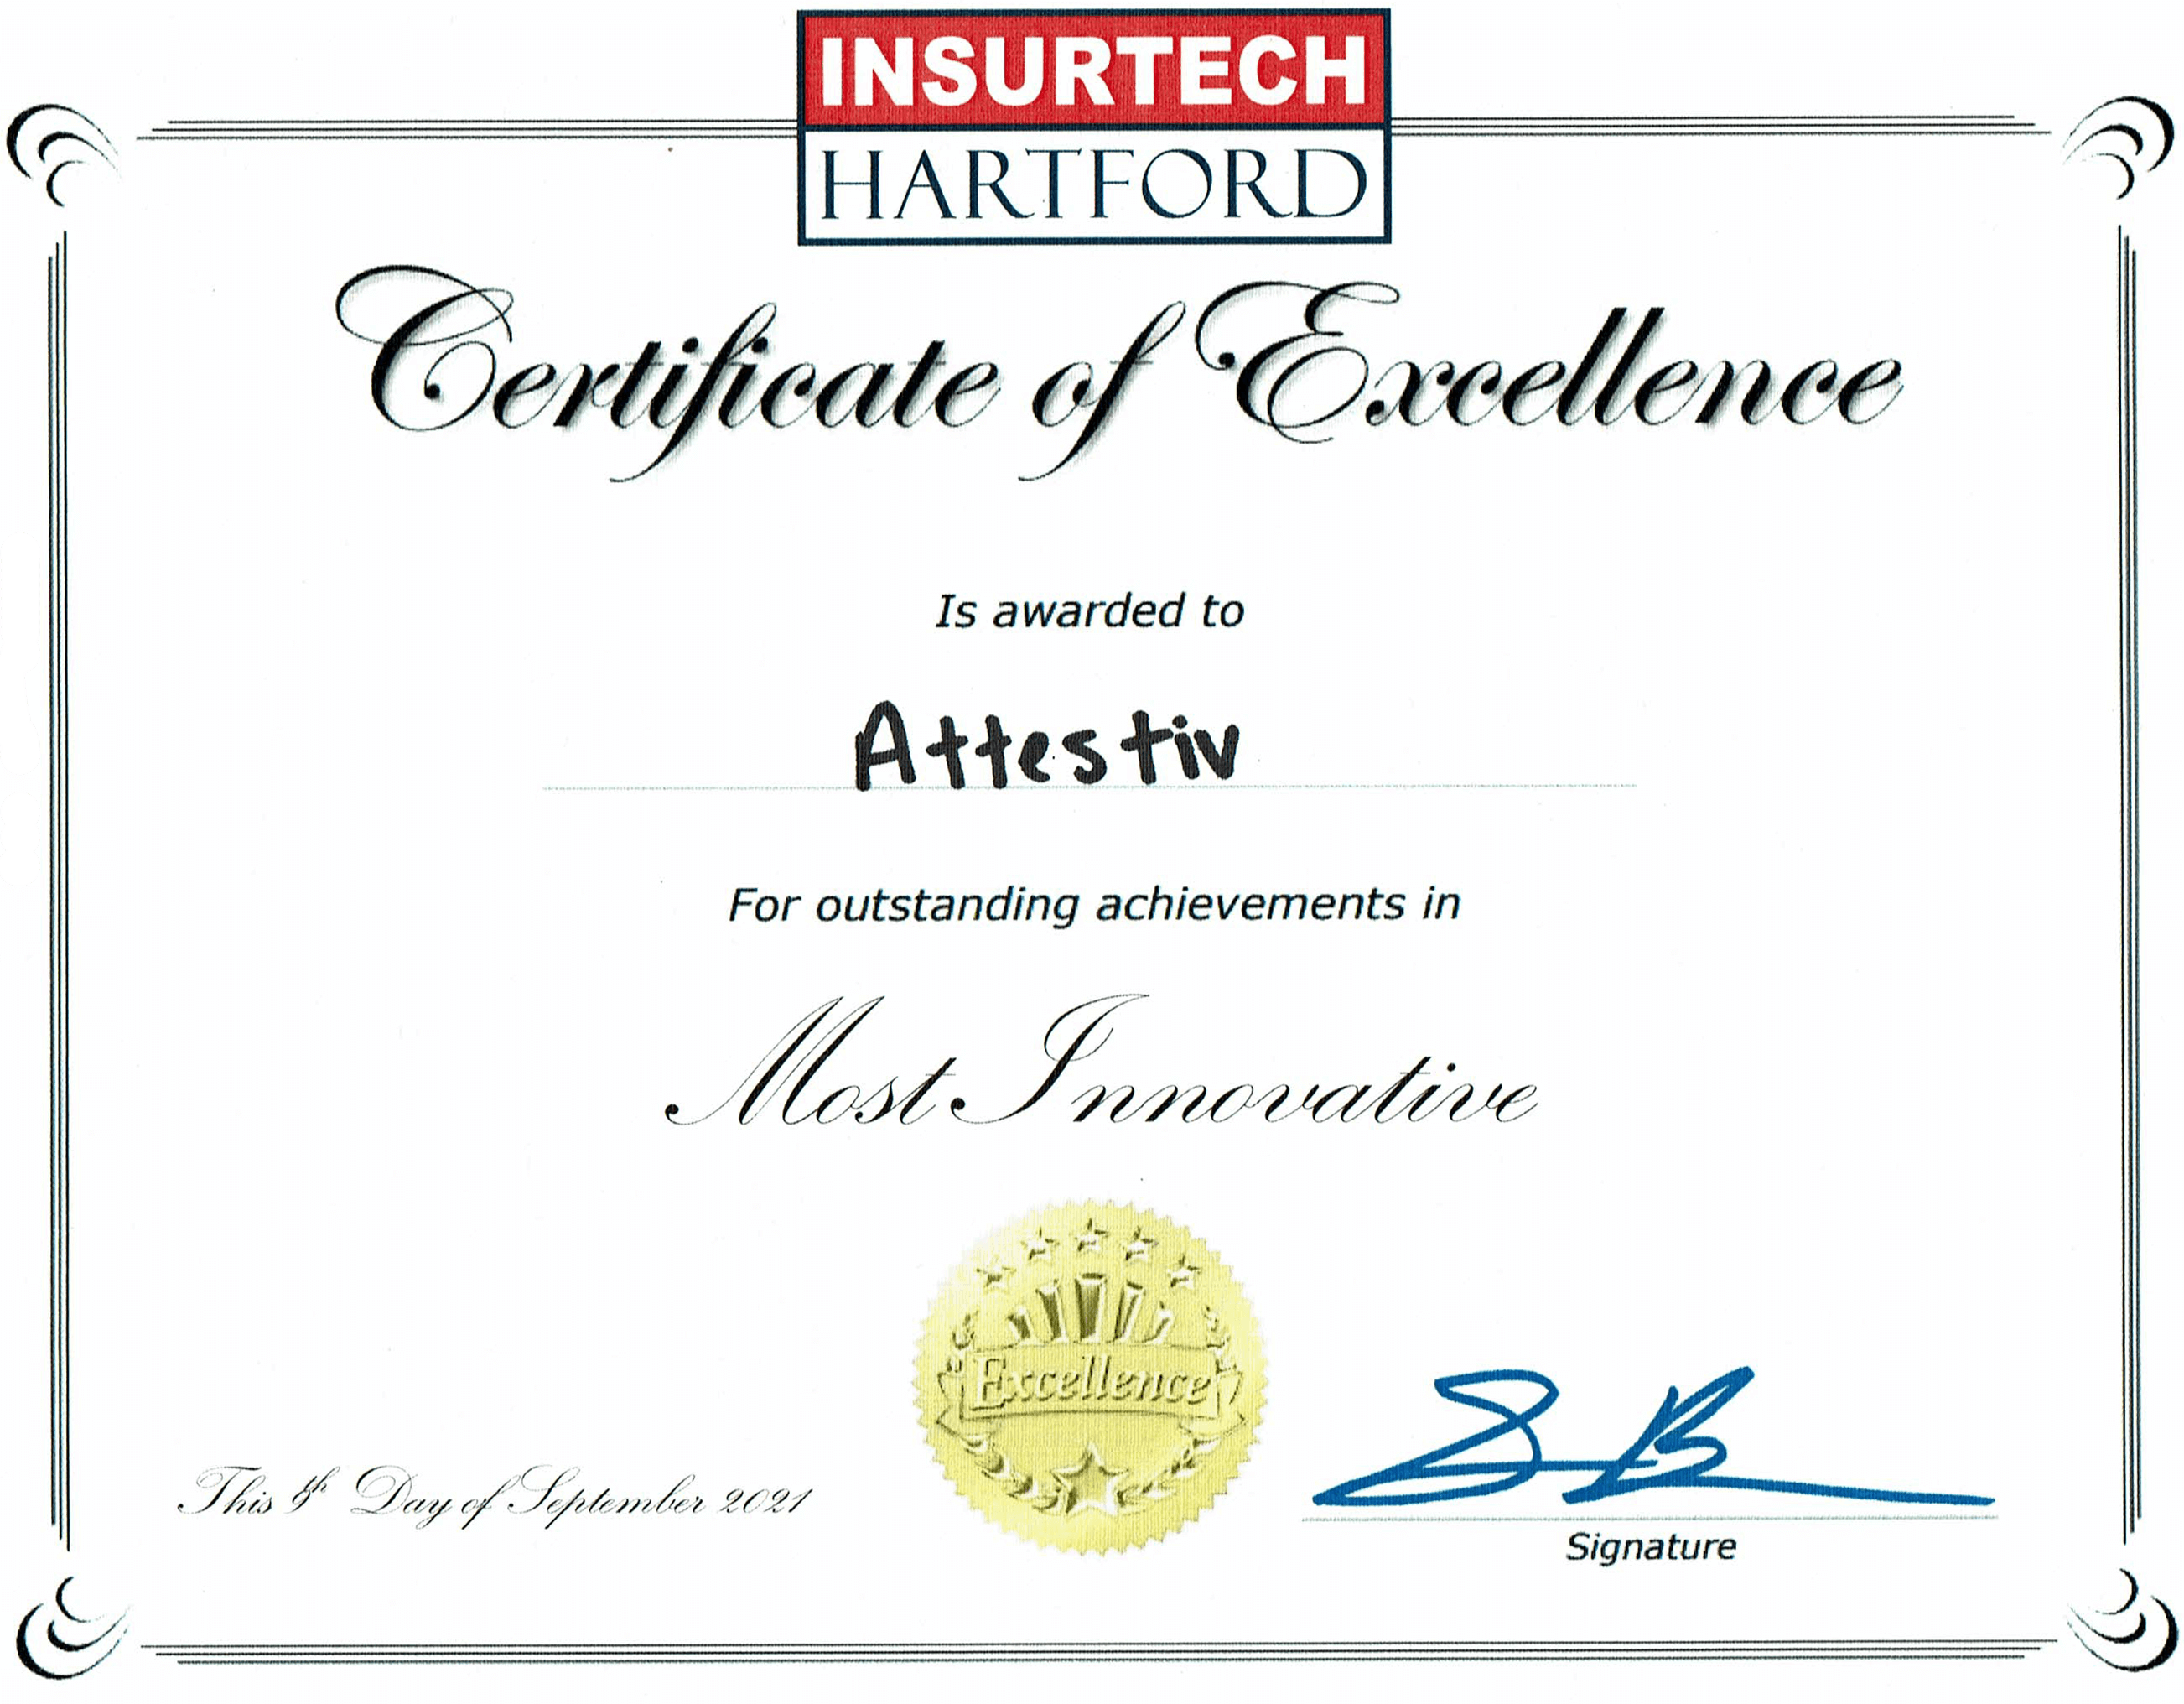 Insurtech Hartford Certificate of excellence - most innovative